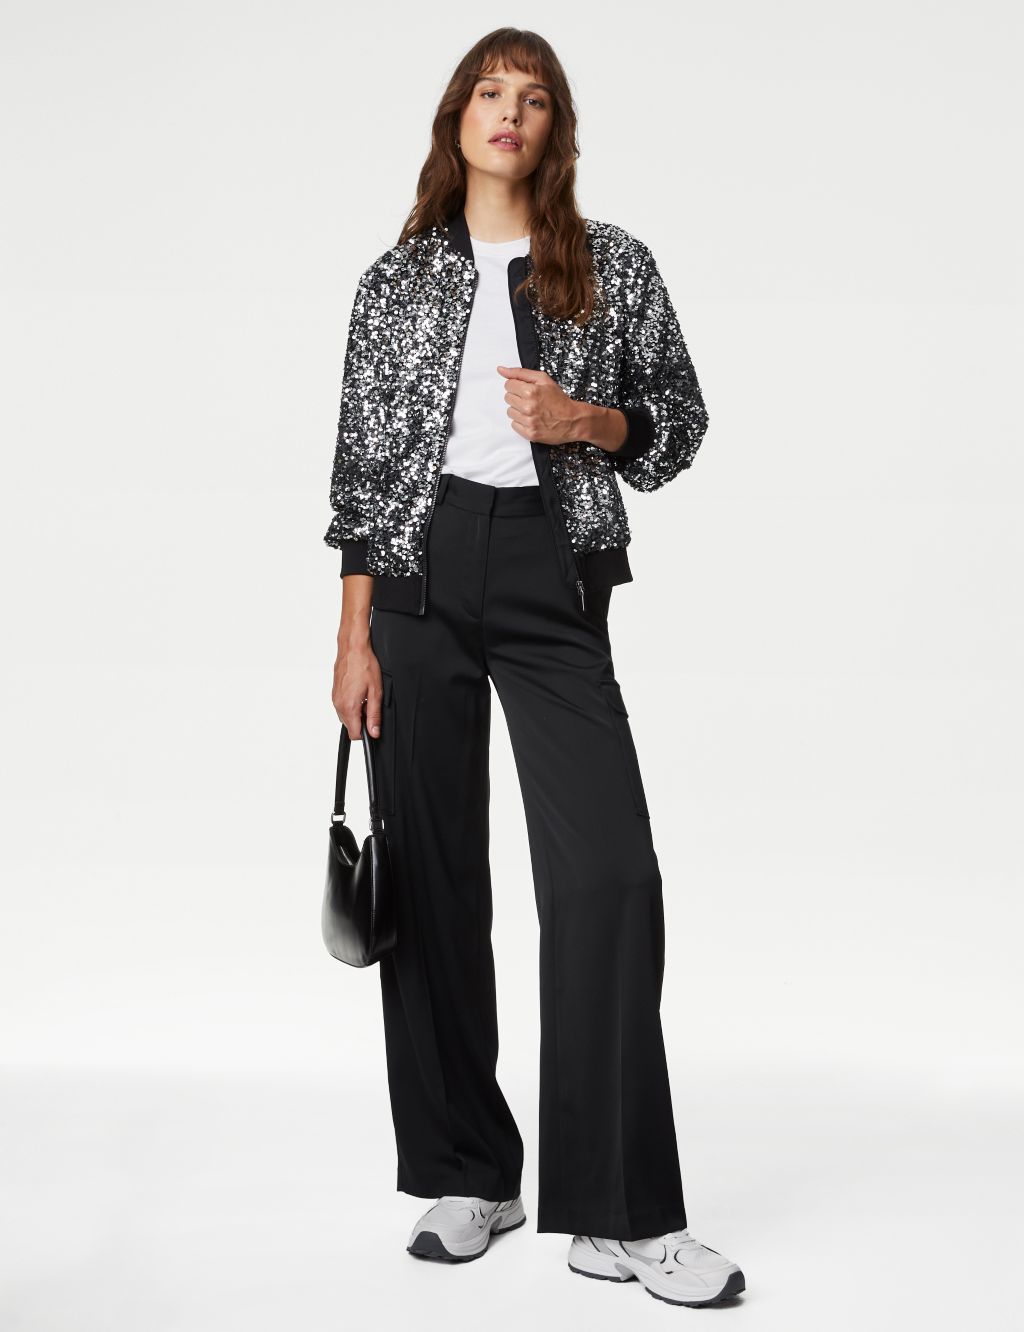 Sequin Relaxed Bomber Jacket image 3